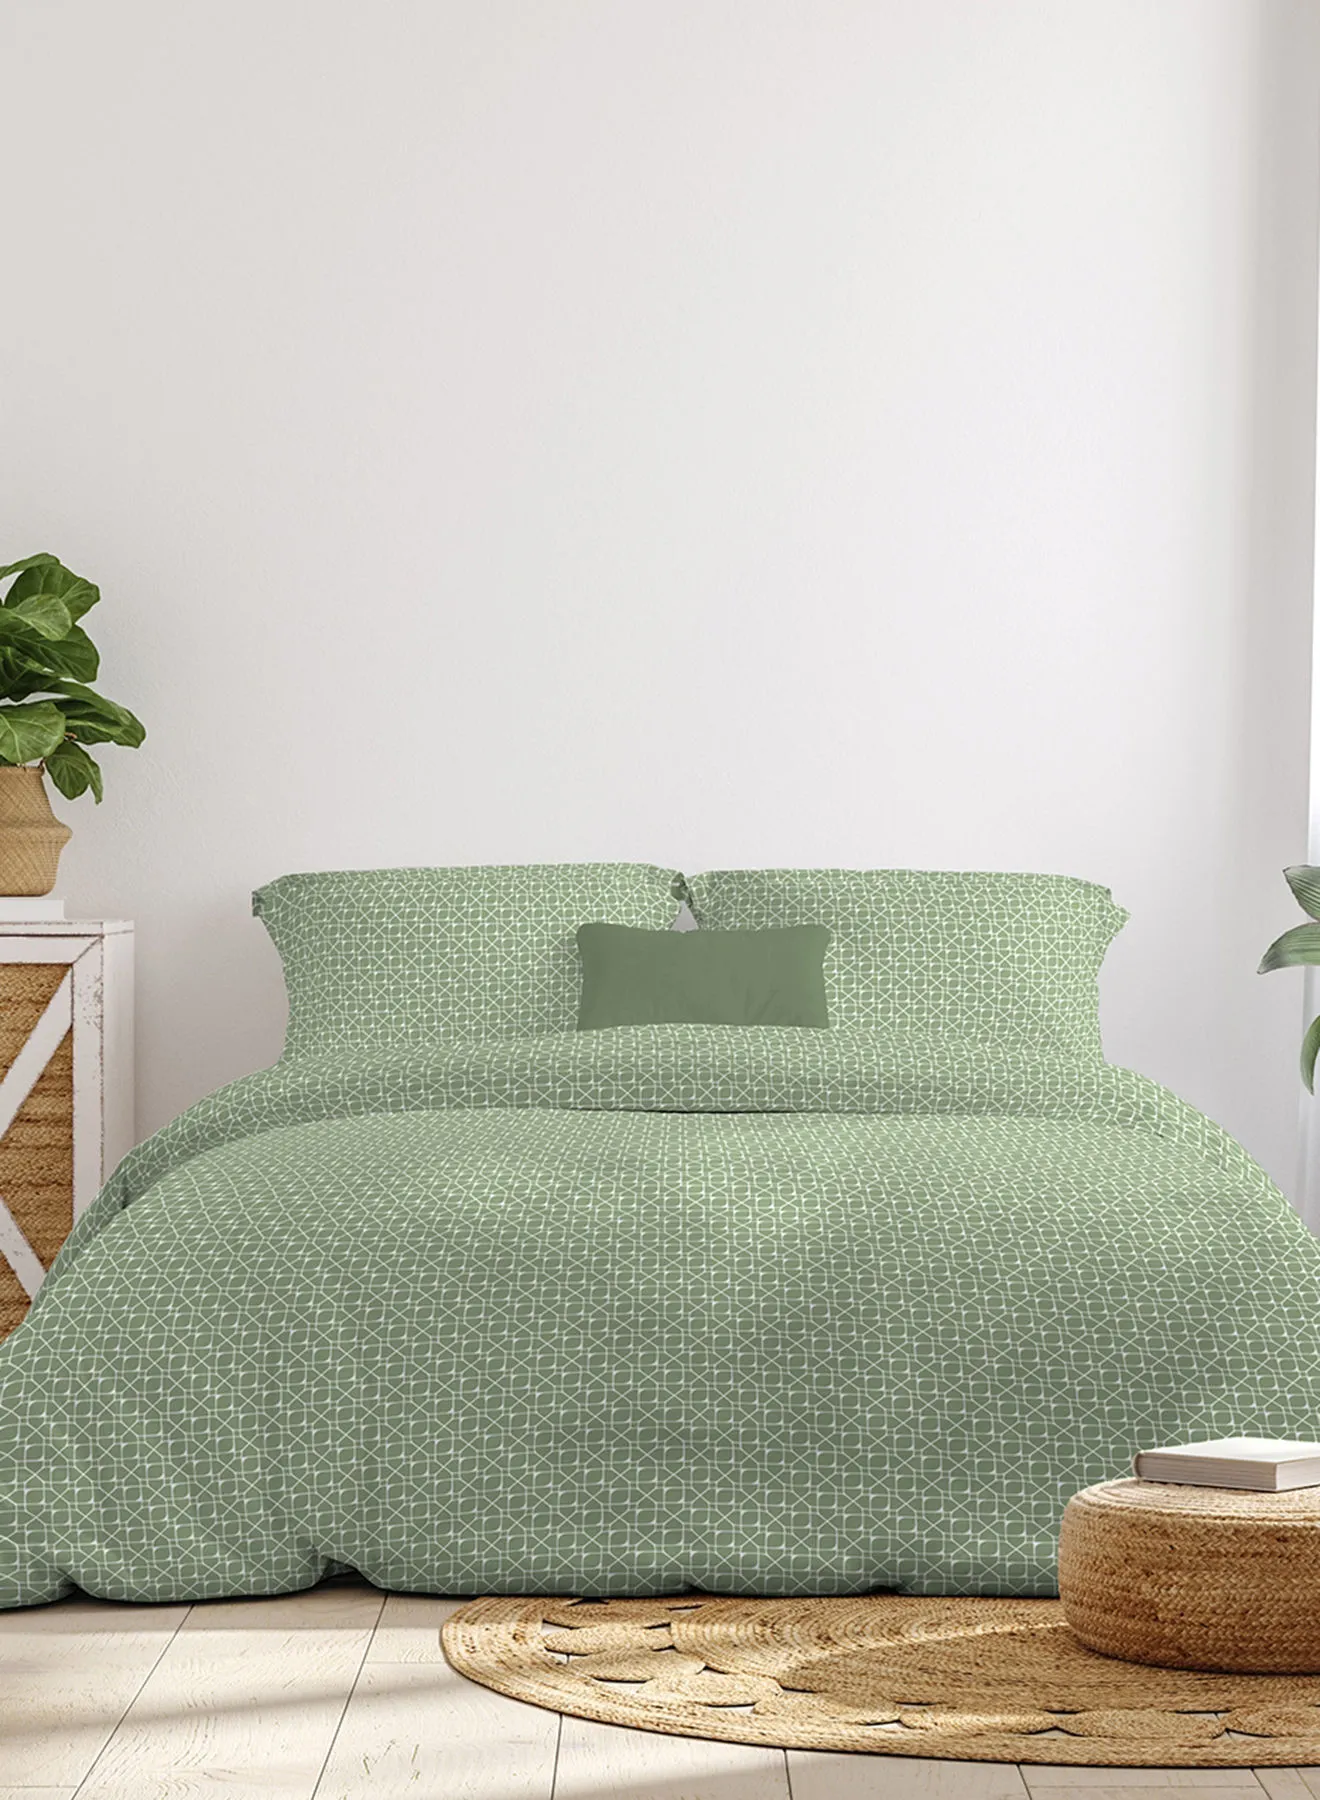 Amal Comforter Set King Size All Season Everyday Use Bedding Set 100% Cotton 3 Pieces 1 Comforter 2 Pillow Covers  Asparagus Green